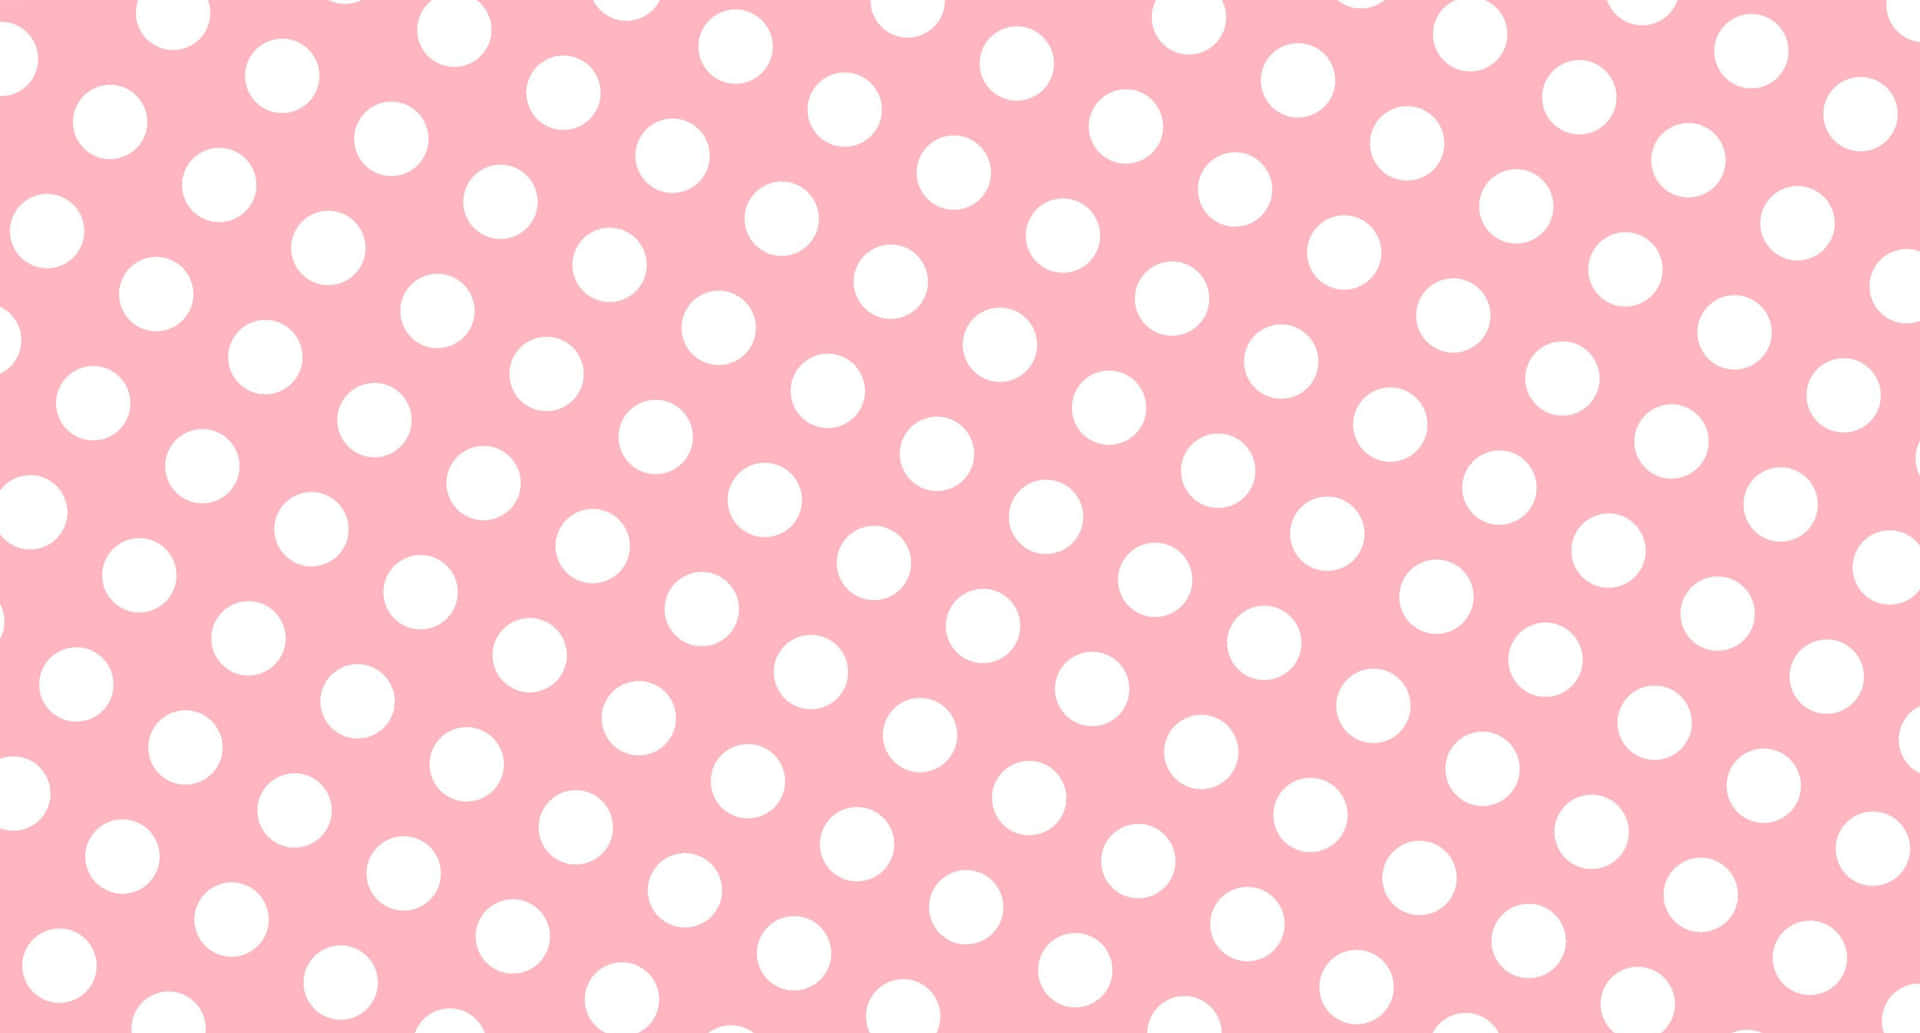 Get the Classic Look with a Pink-Colored Polka Dot